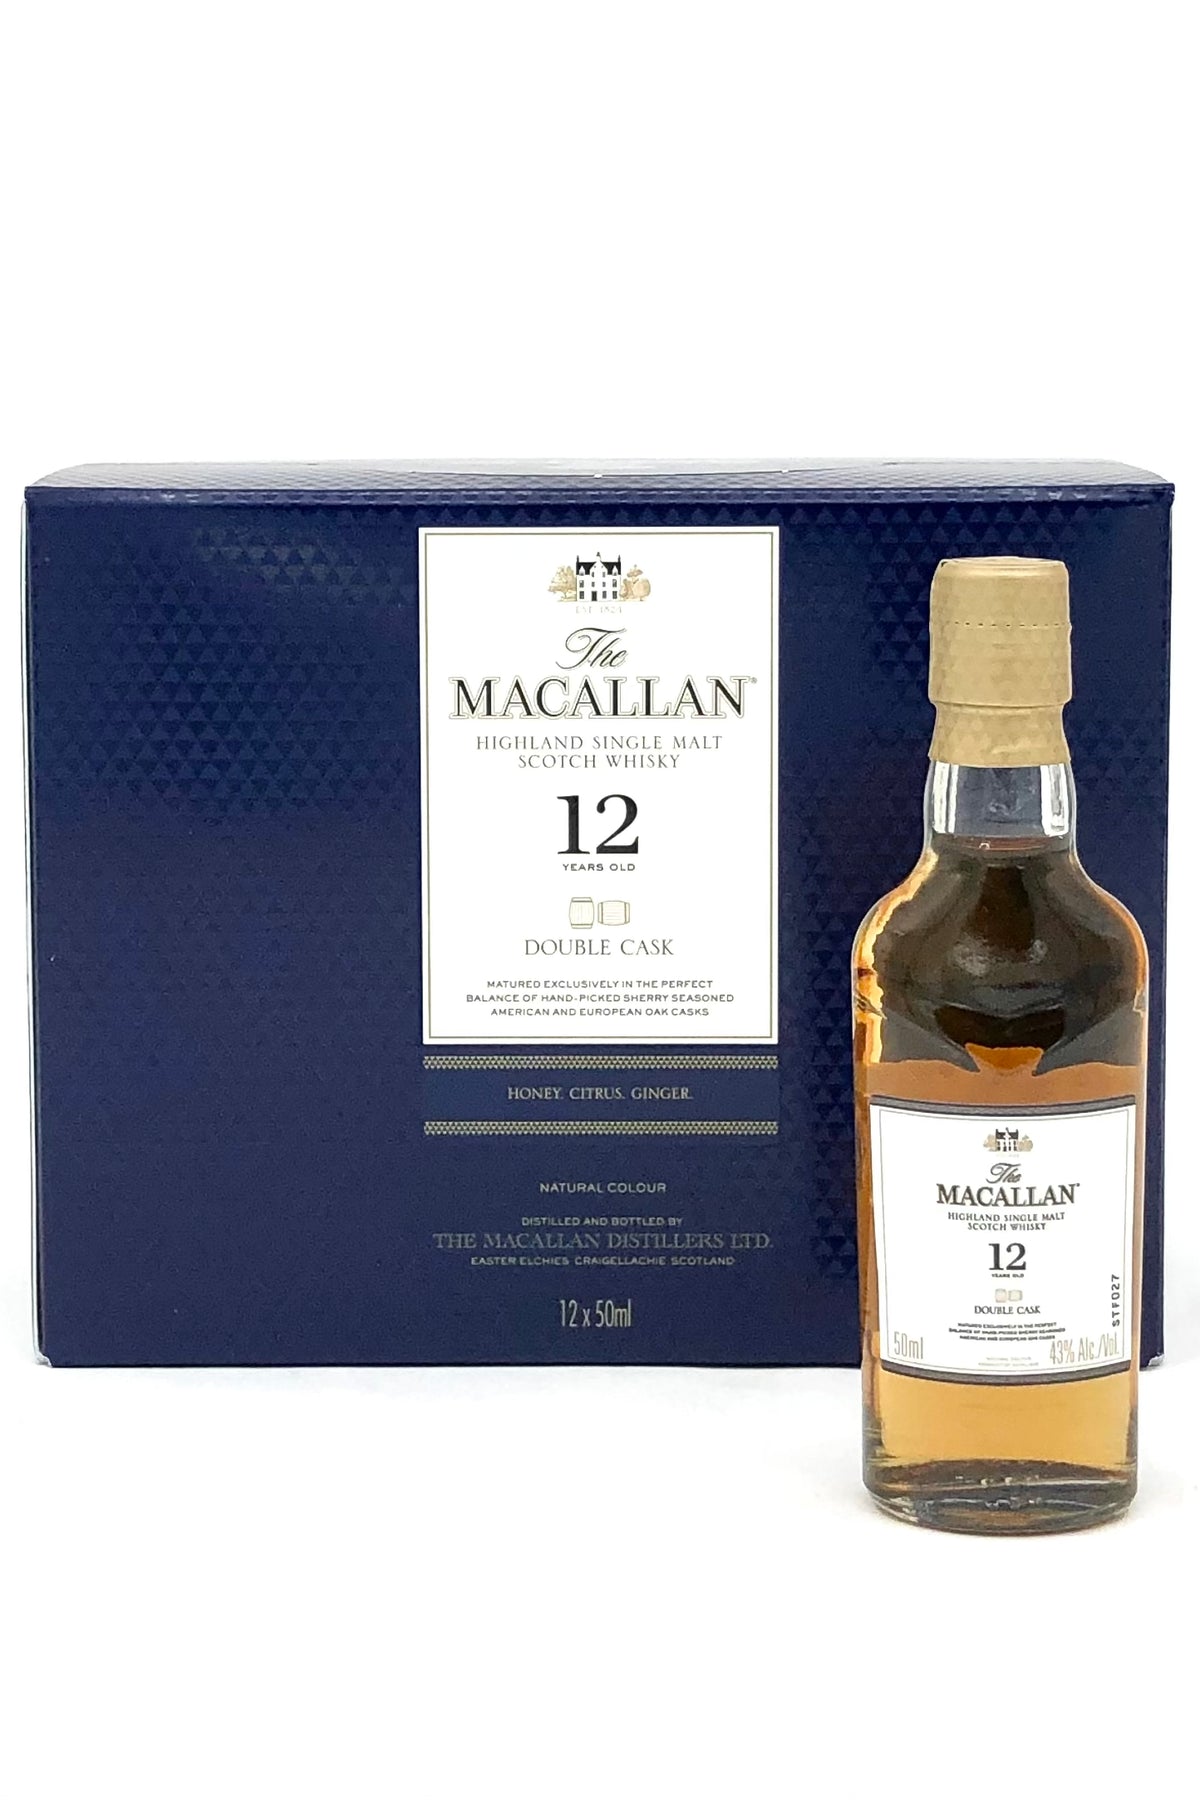 Buy Scotch Whisky: Top Single Malts Book Online at Low Prices in